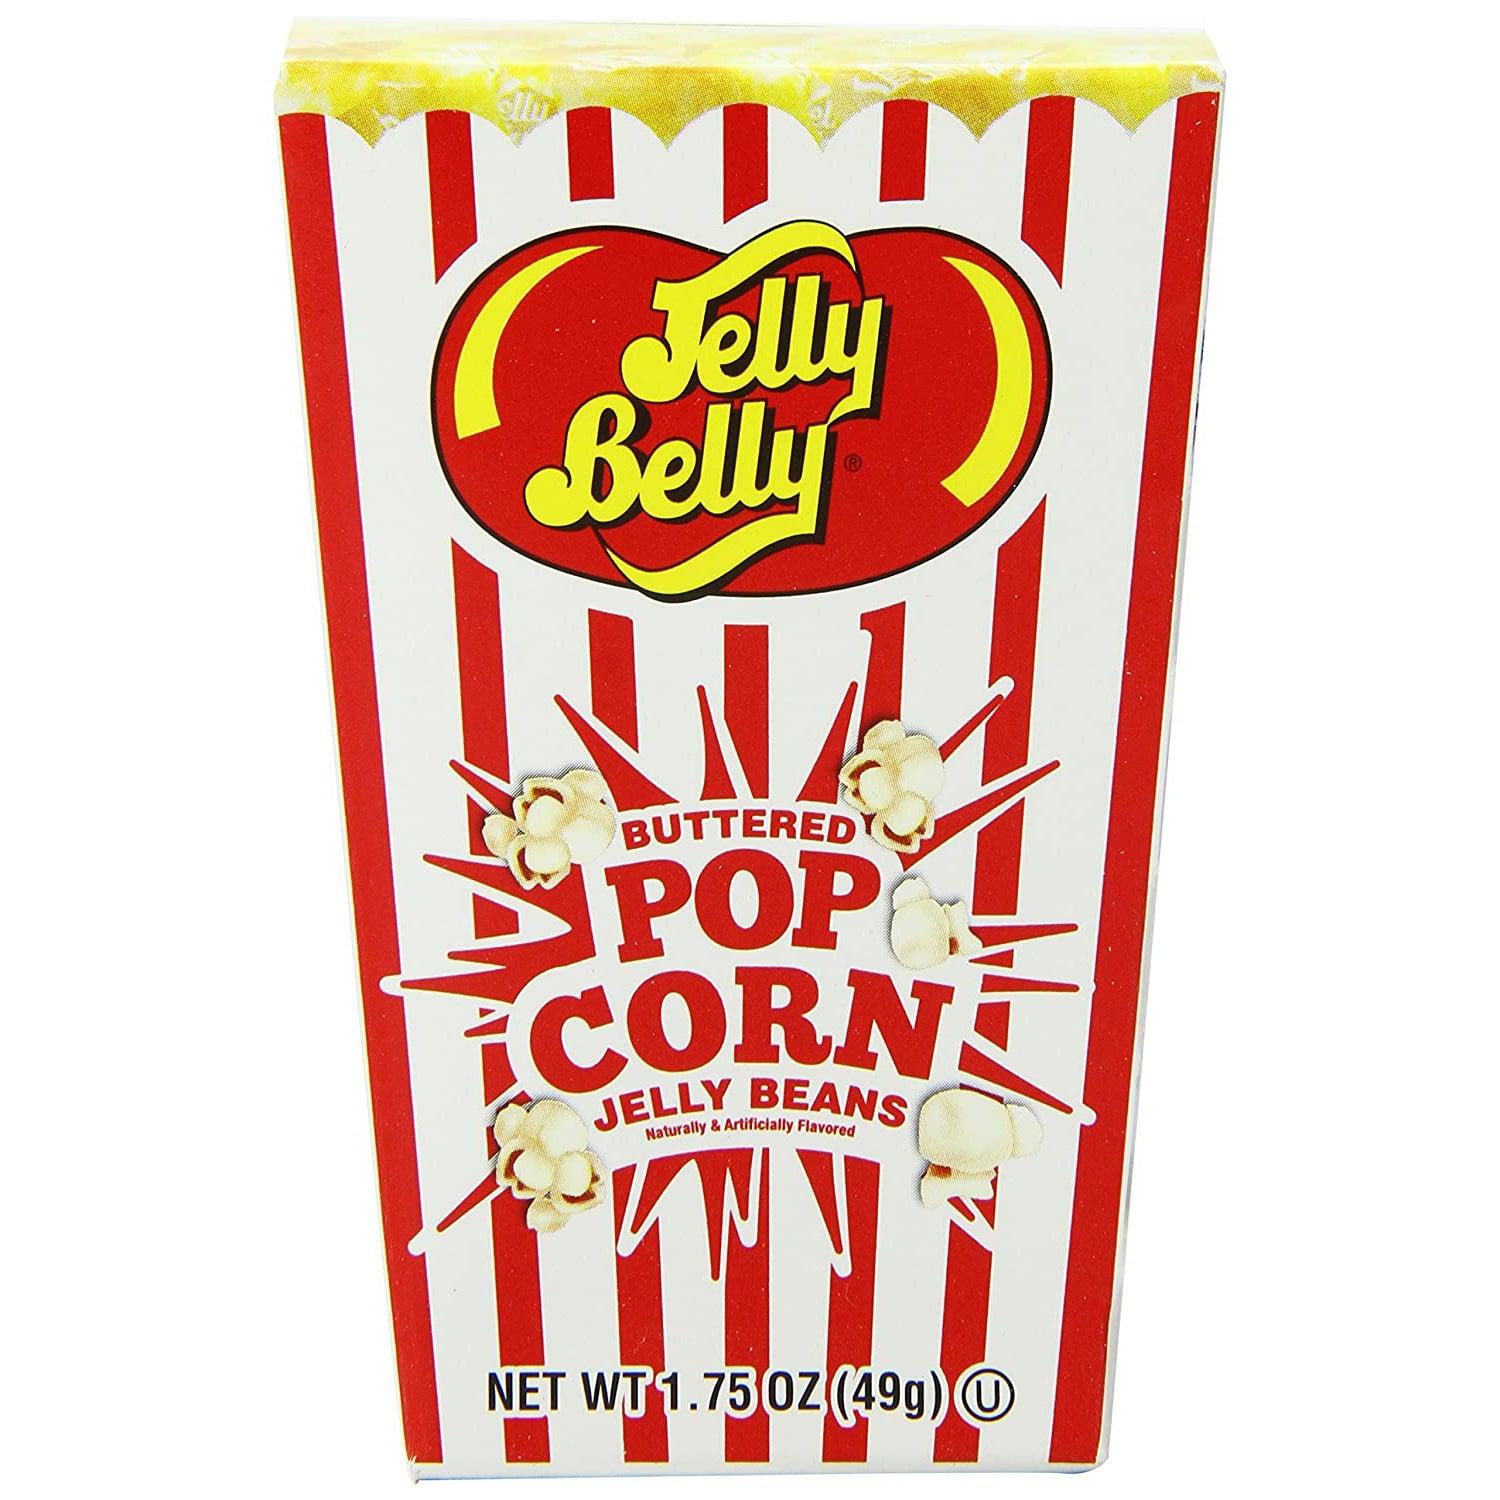 Jelly Belly Buttered Pop Corn Jelly Beans - 1.75 oz box